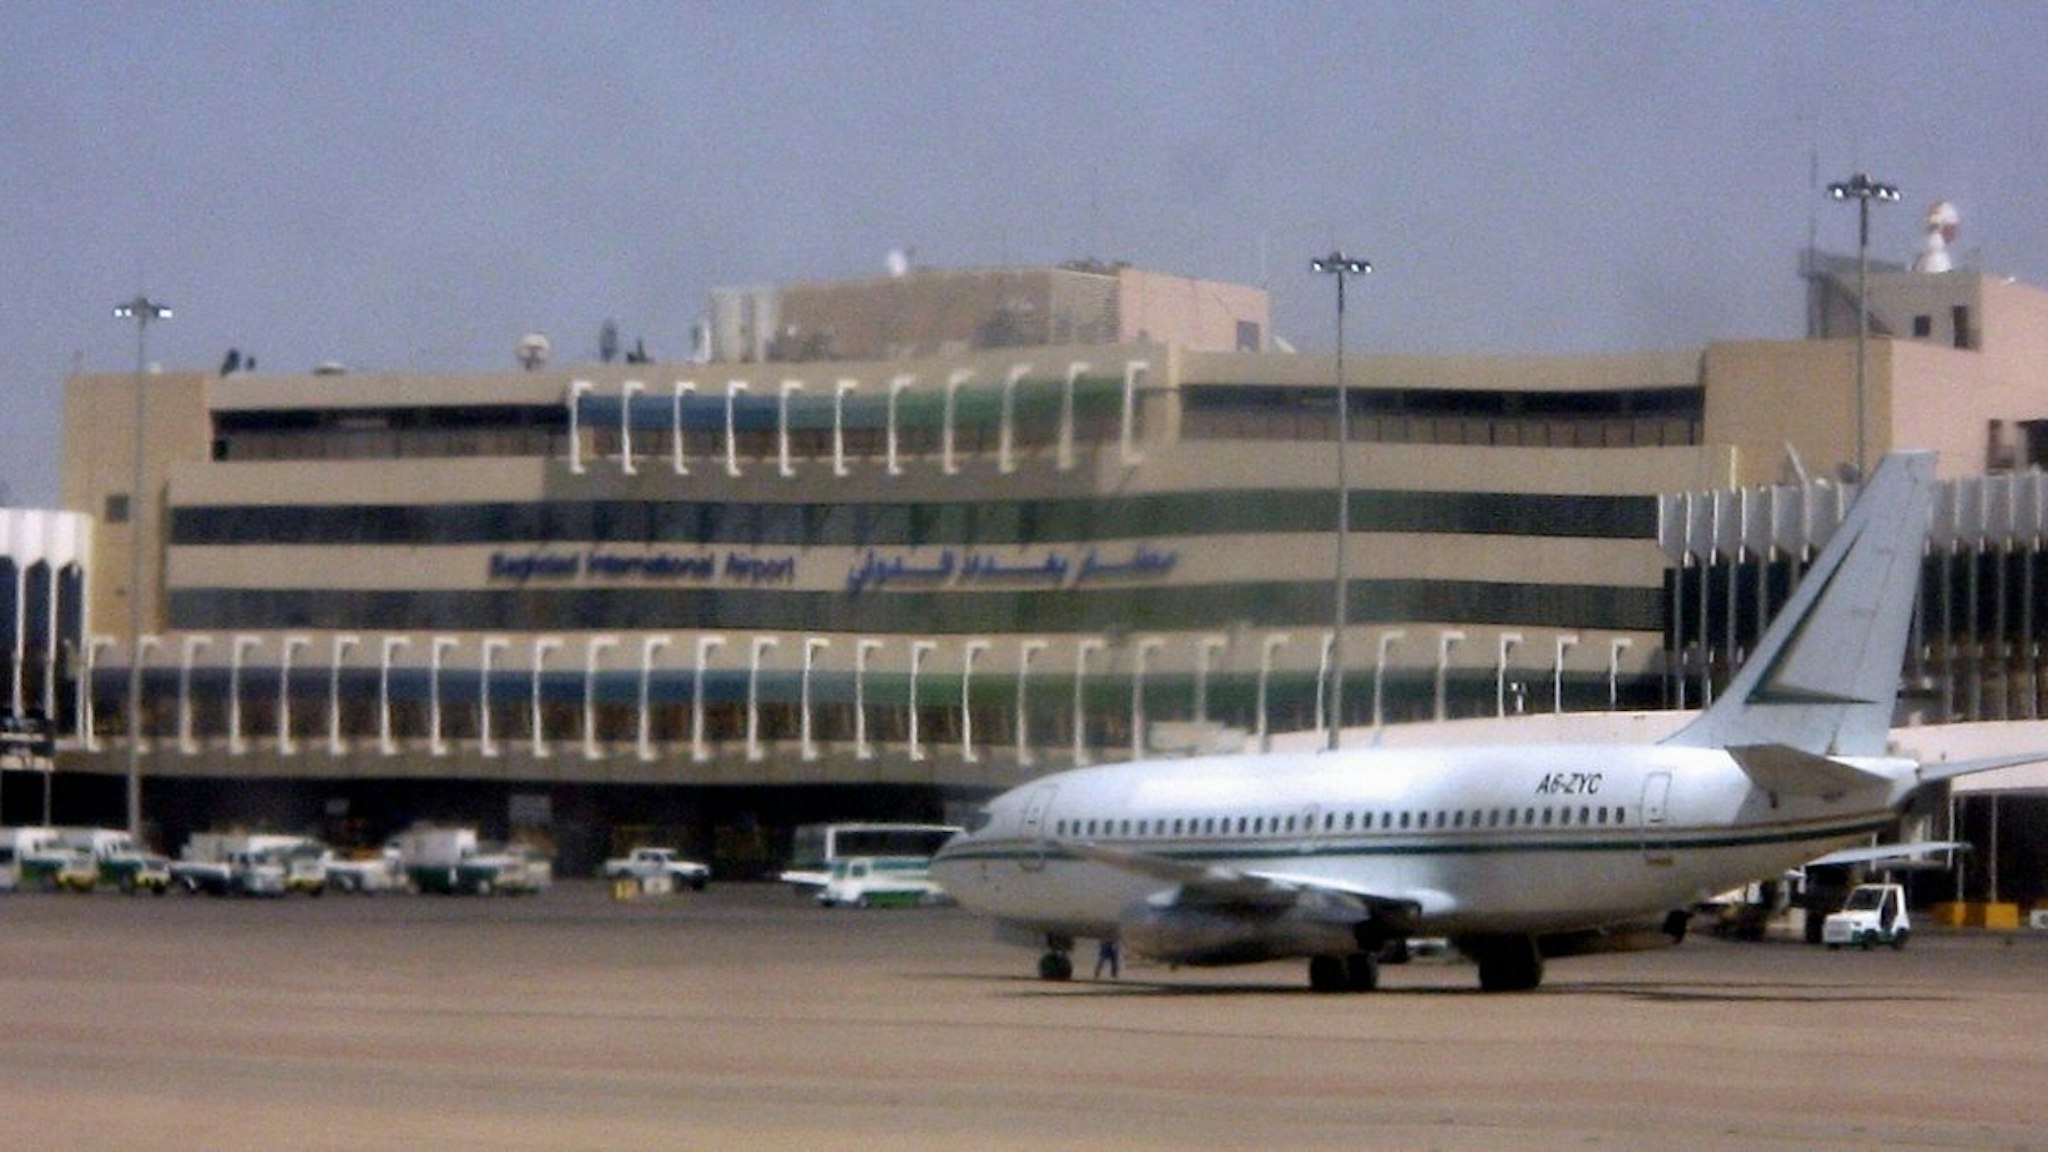 An unidentified plane sits on the runway of the Baghdad international airport 06 July 2006. Formerly known as Saddam International Airport, the French-designed Baghdad airport was severely damaged during the 2003 war, and was already in a state of disrepair as a result of UN-imposed sanctions.